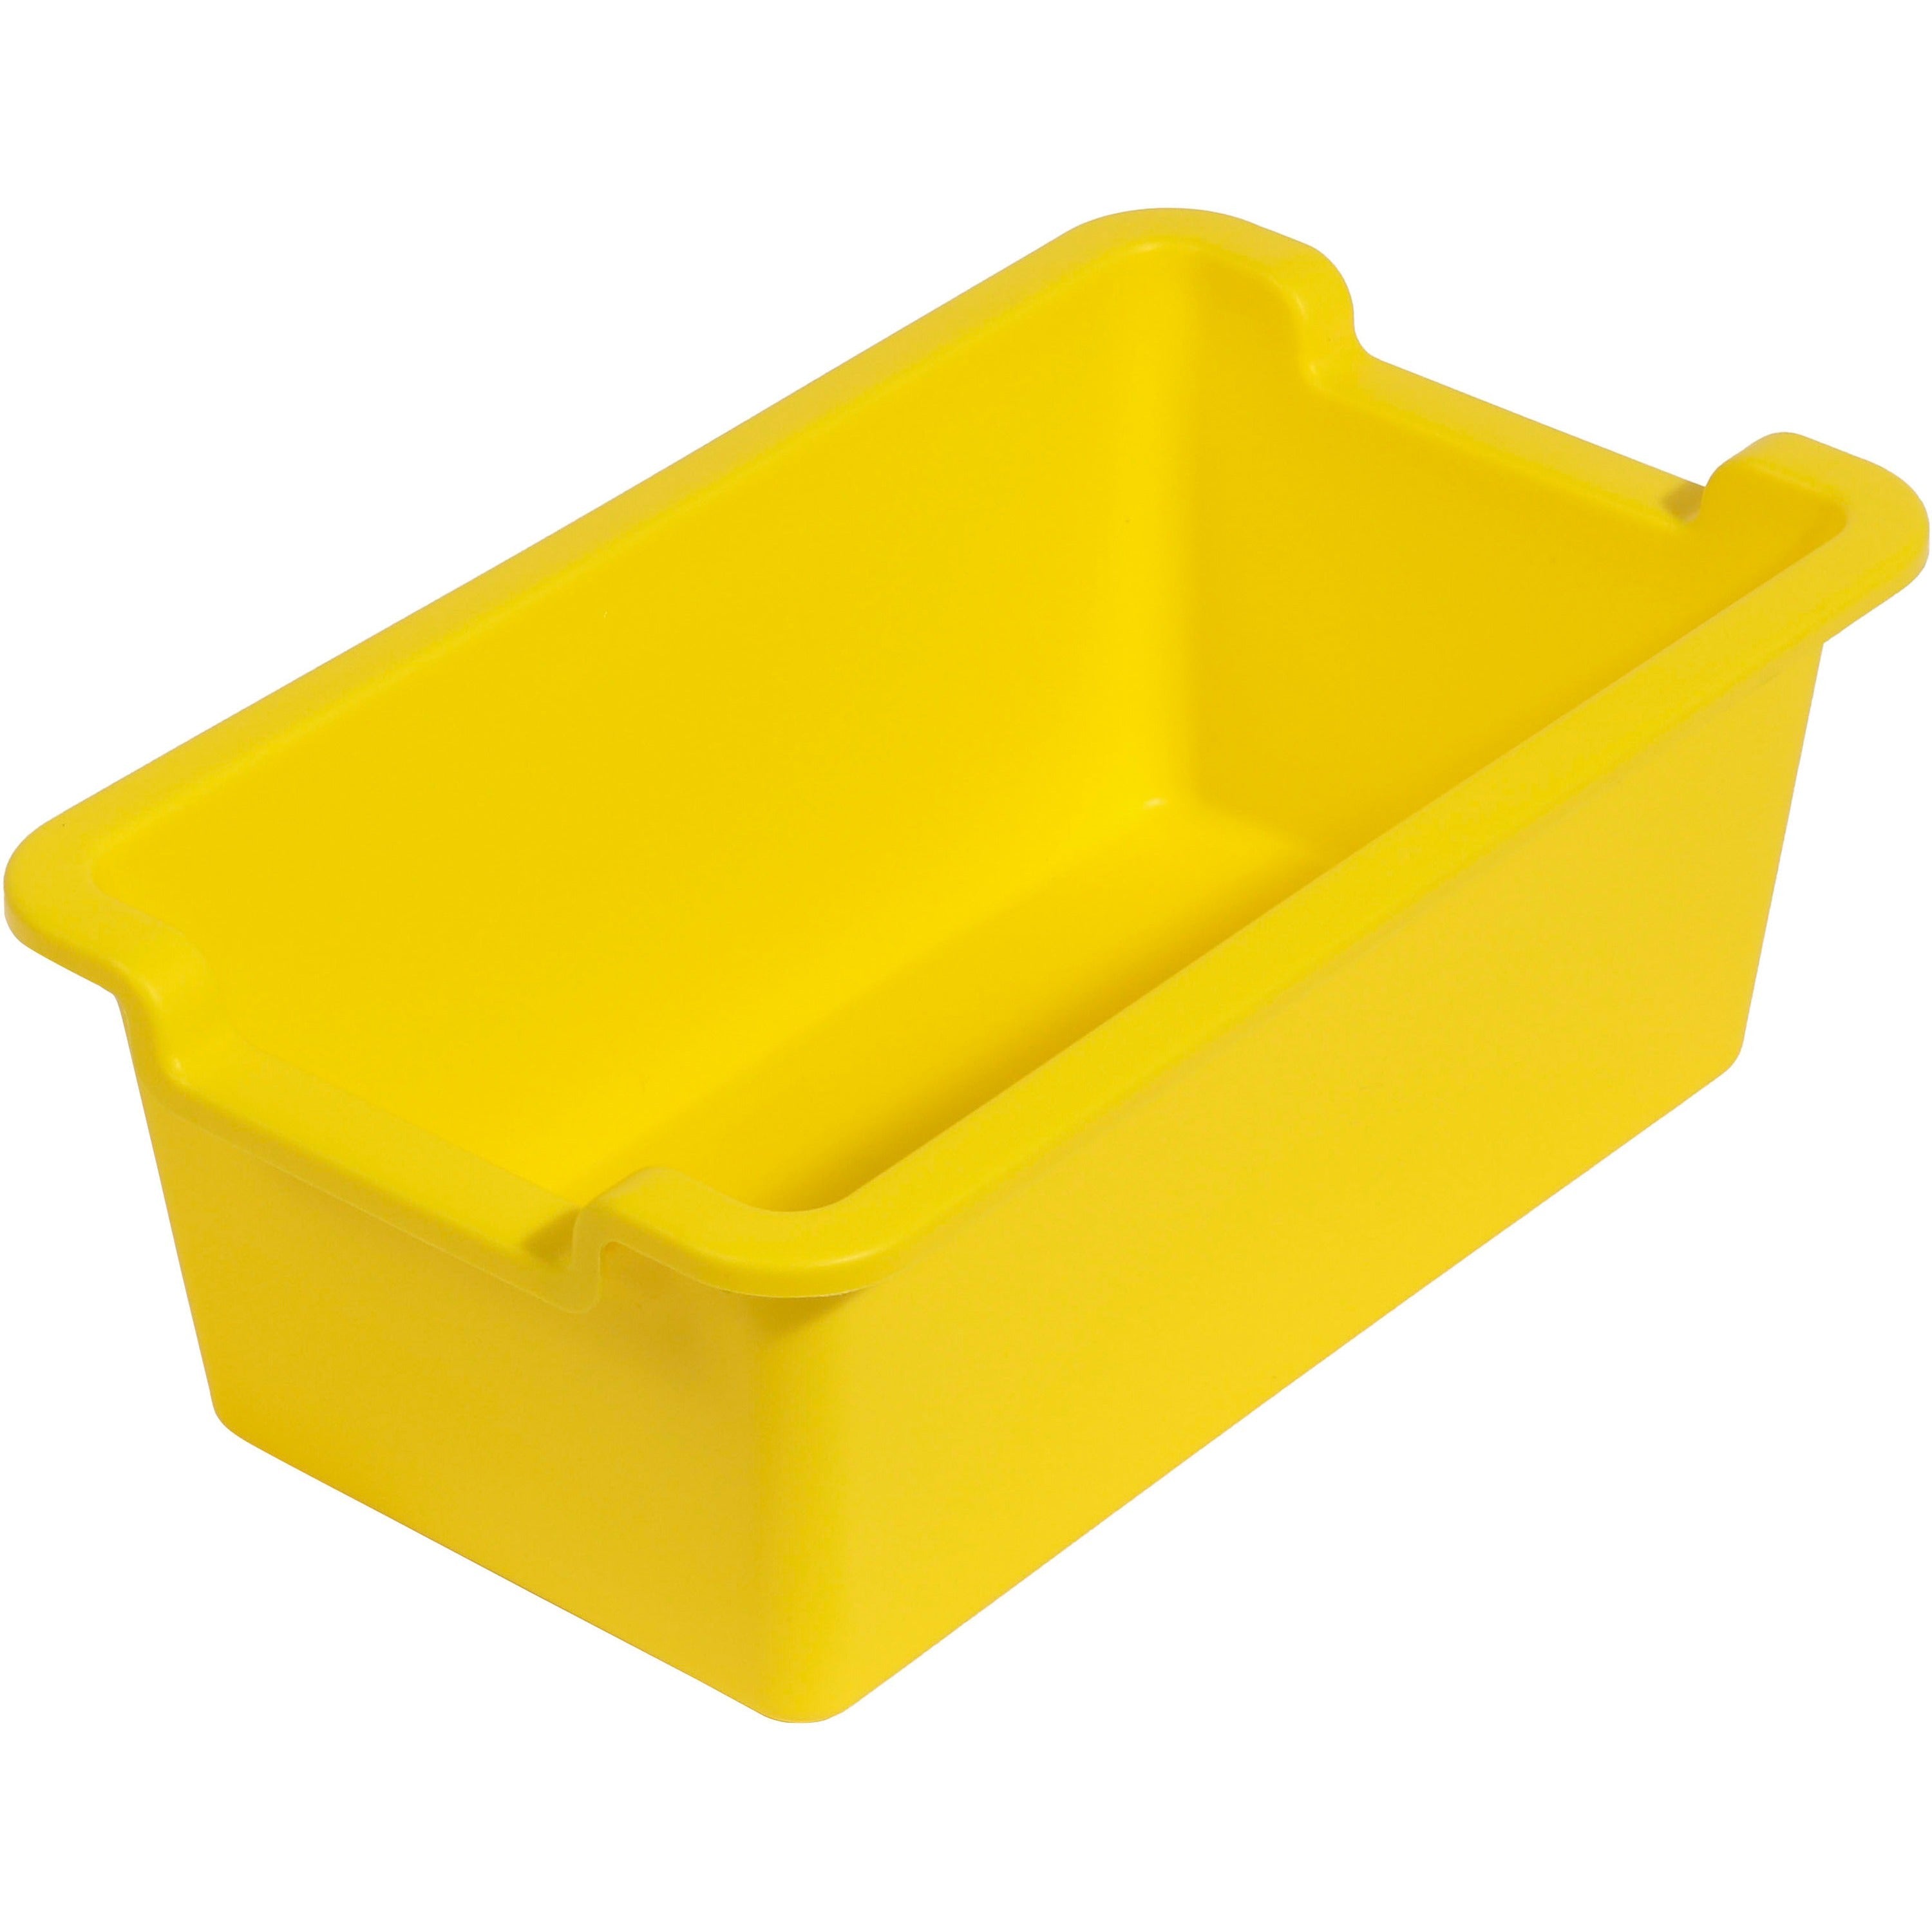 deflecto-antimicrobial-rectangular-storage-bin-51-height-x-132-width-x-81-depth-antimicrobial-lightweight-mold-resistant-mildew-resistant-handle-portable-stackable-yellow-polypropylene-1-each_def39510yel - 1